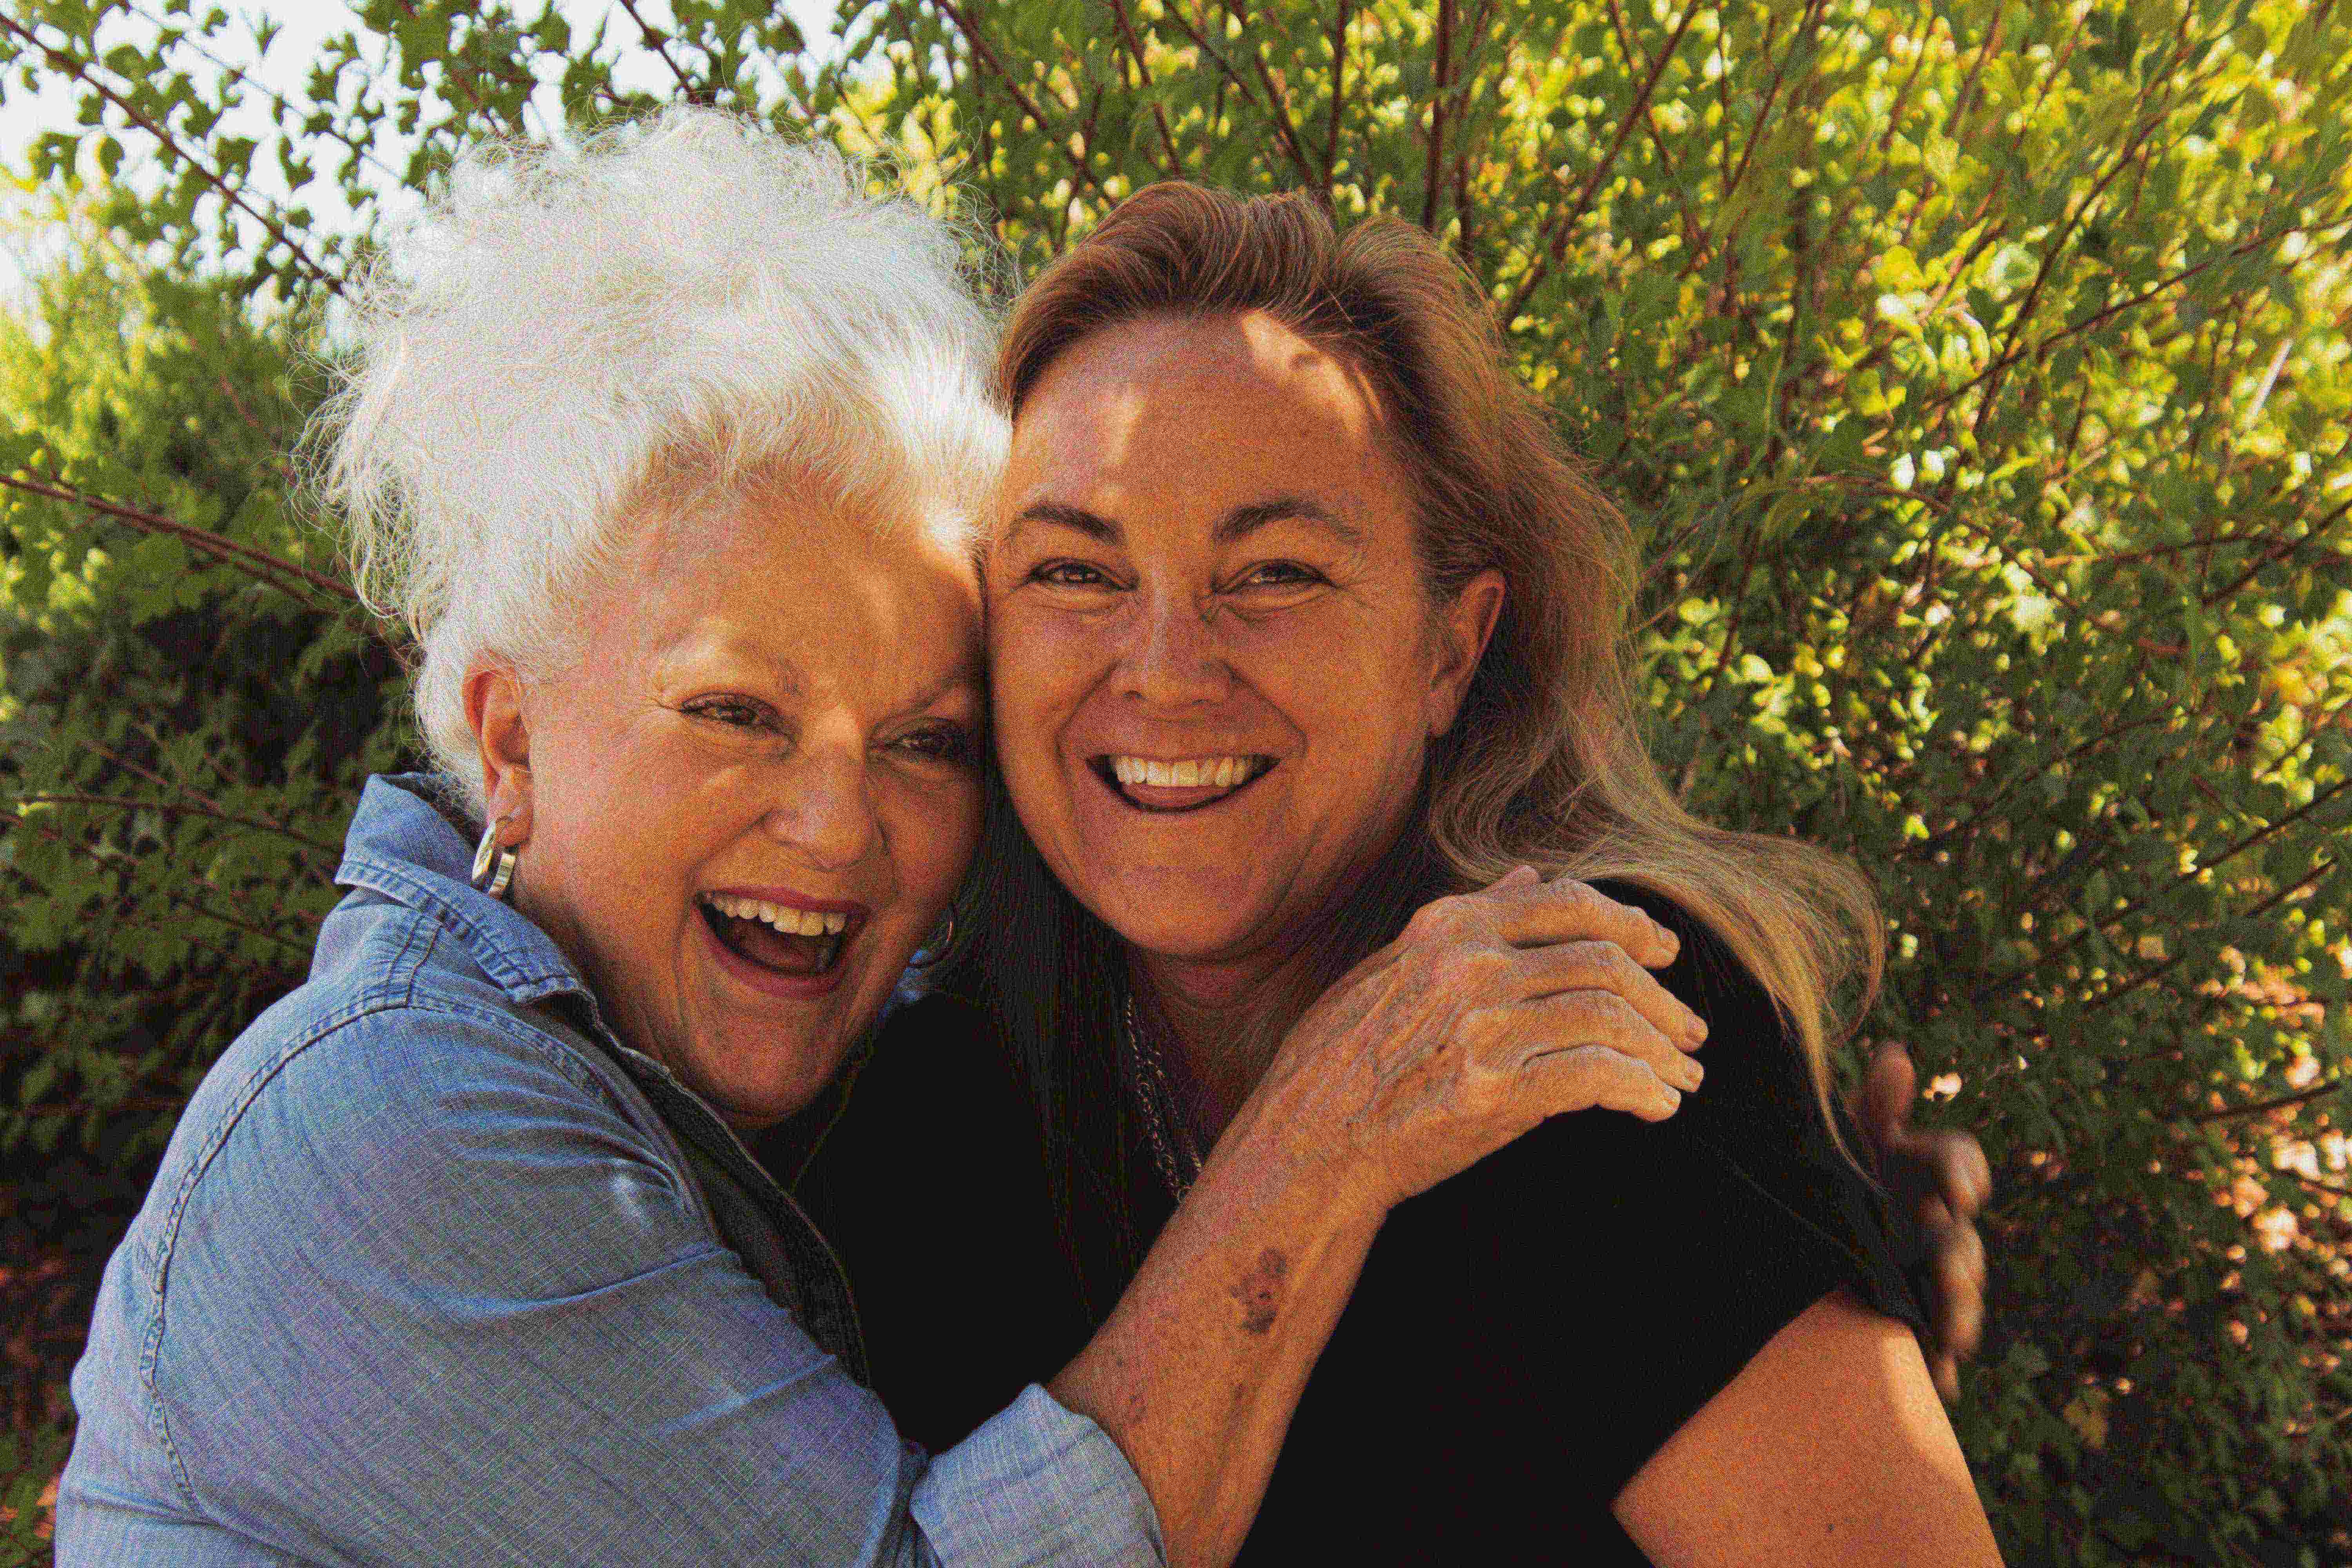 Buddy system makes life a little brighter for dementia patients